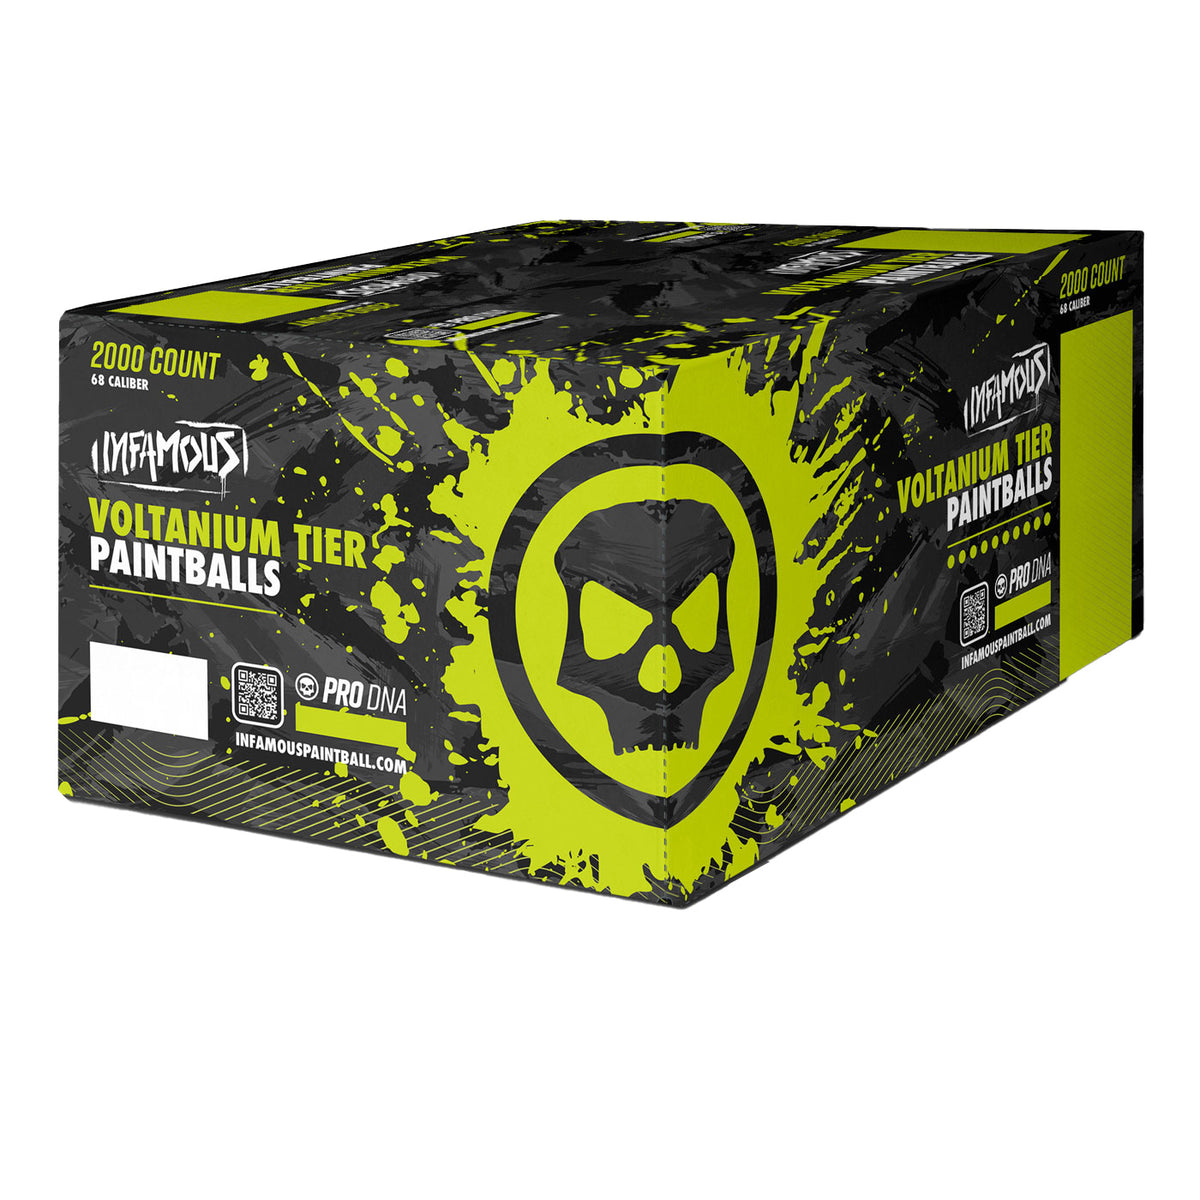  XBALL Certified Midnight Paintballs - Shell Varies - Aqua Fill  (500 Count) : Sports & Outdoors